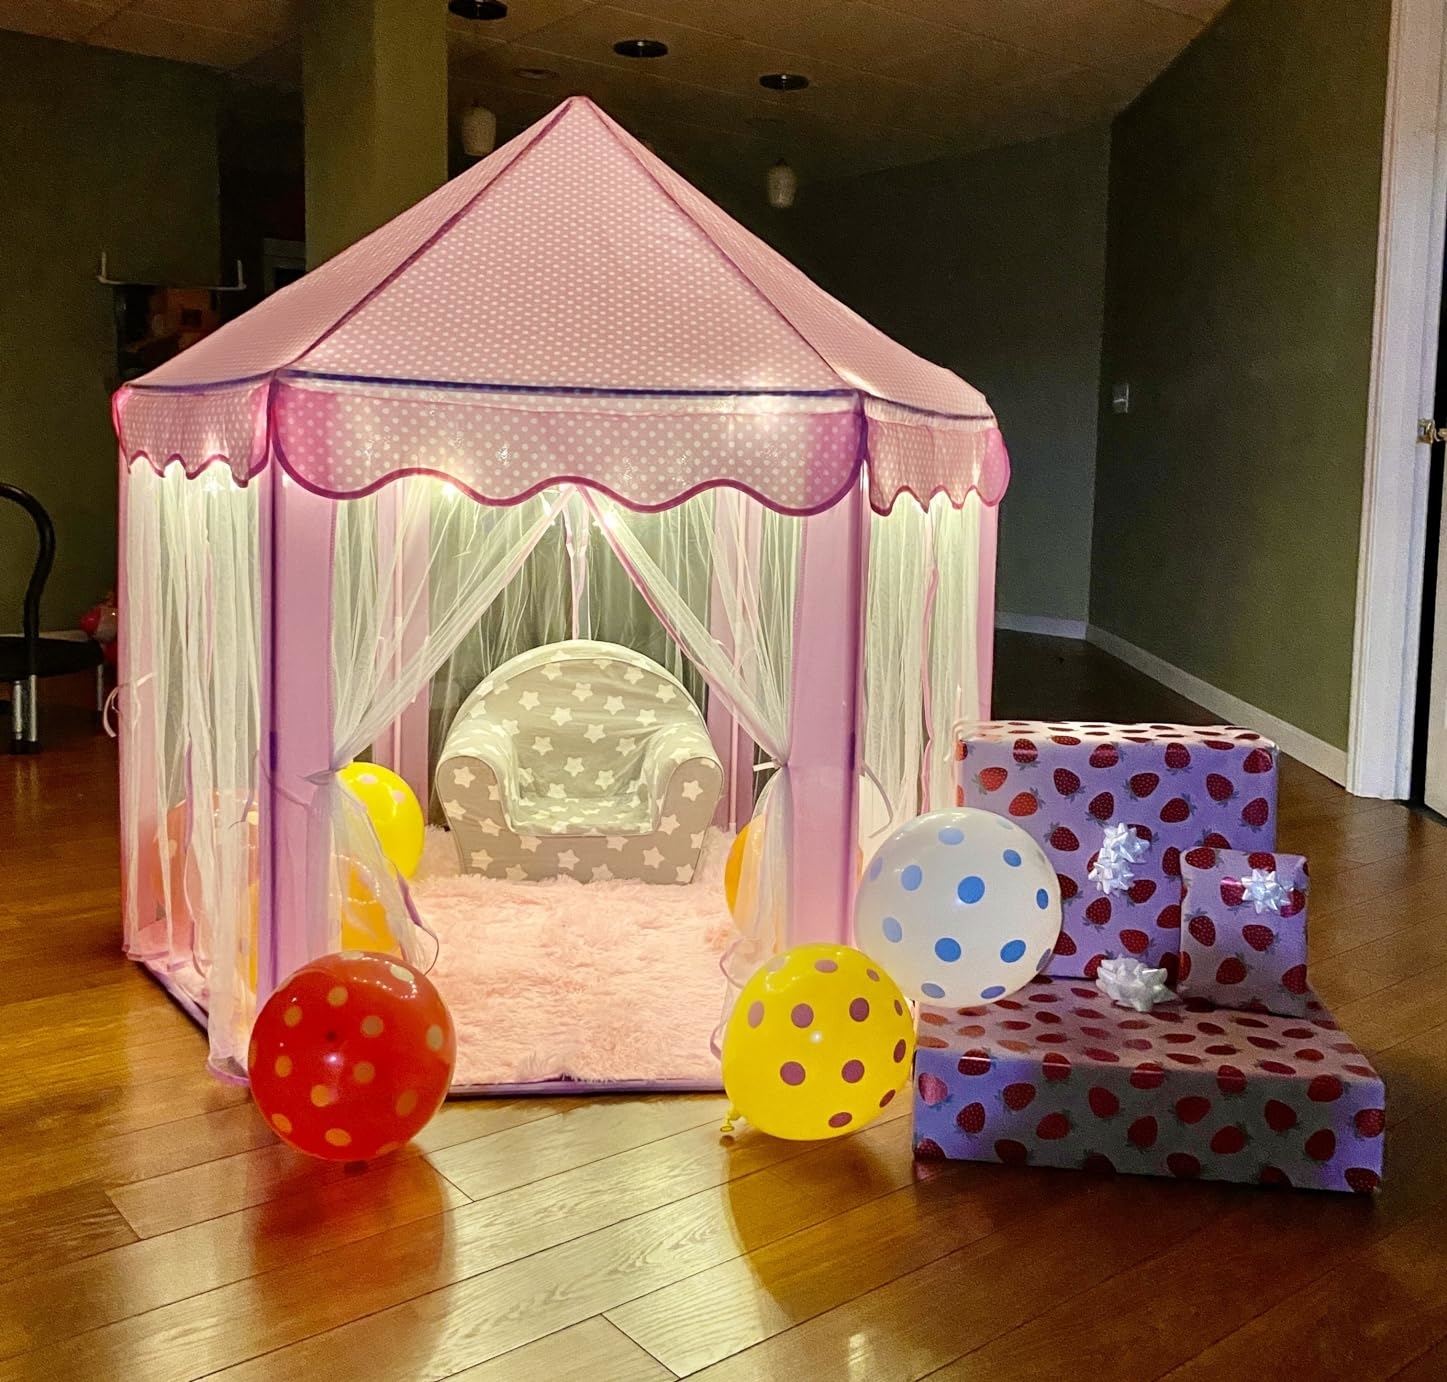 Child's play tent set up indoors with patterned pillows and colorful balloons around it